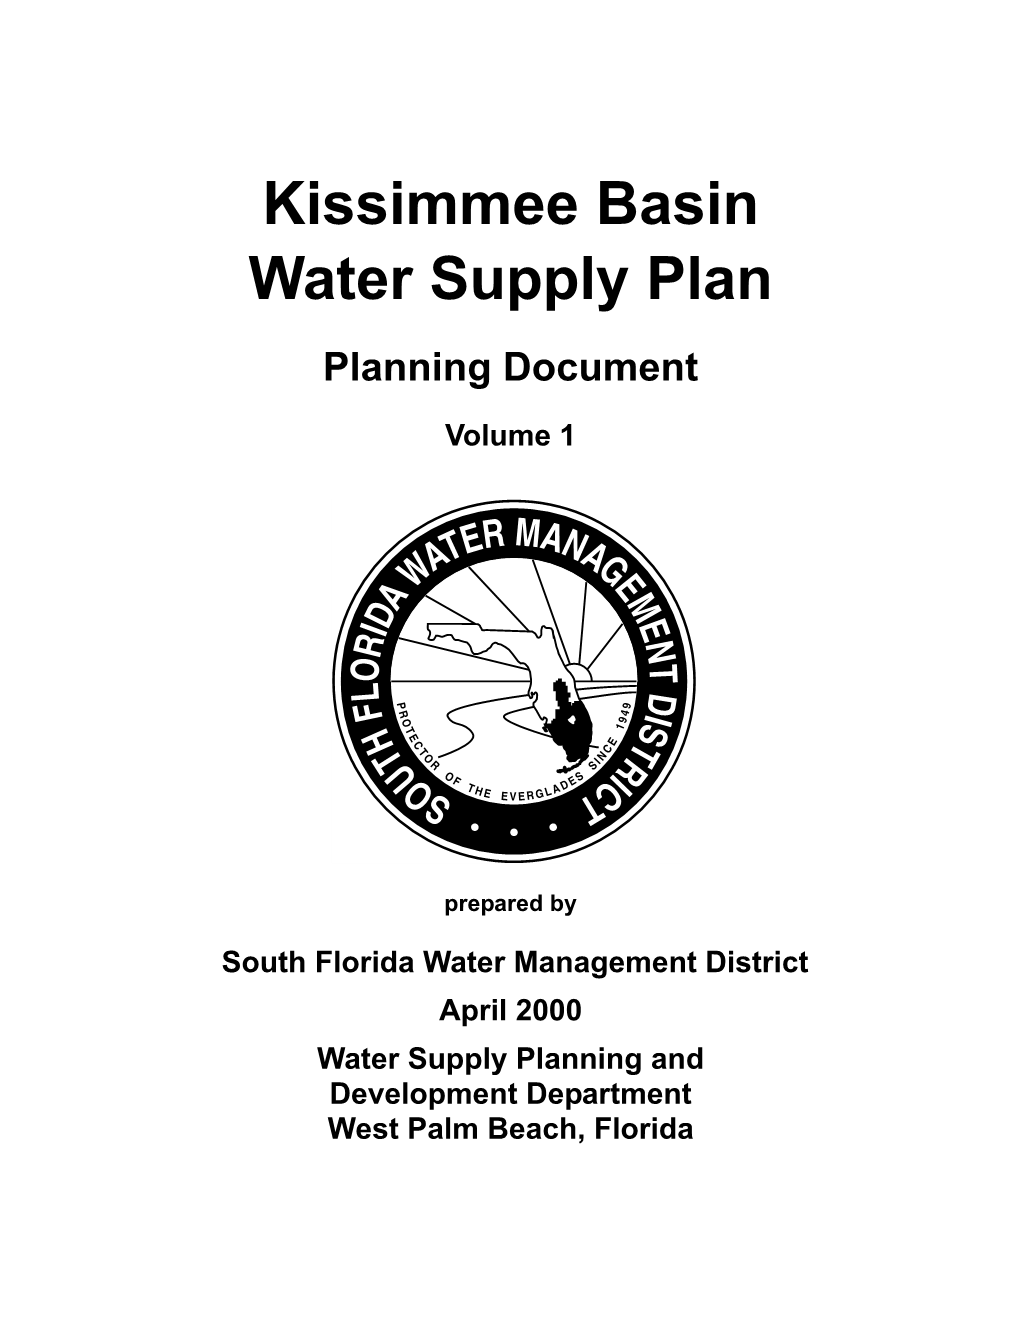 Kissimmee Basin Water Supply Plan Planning Document